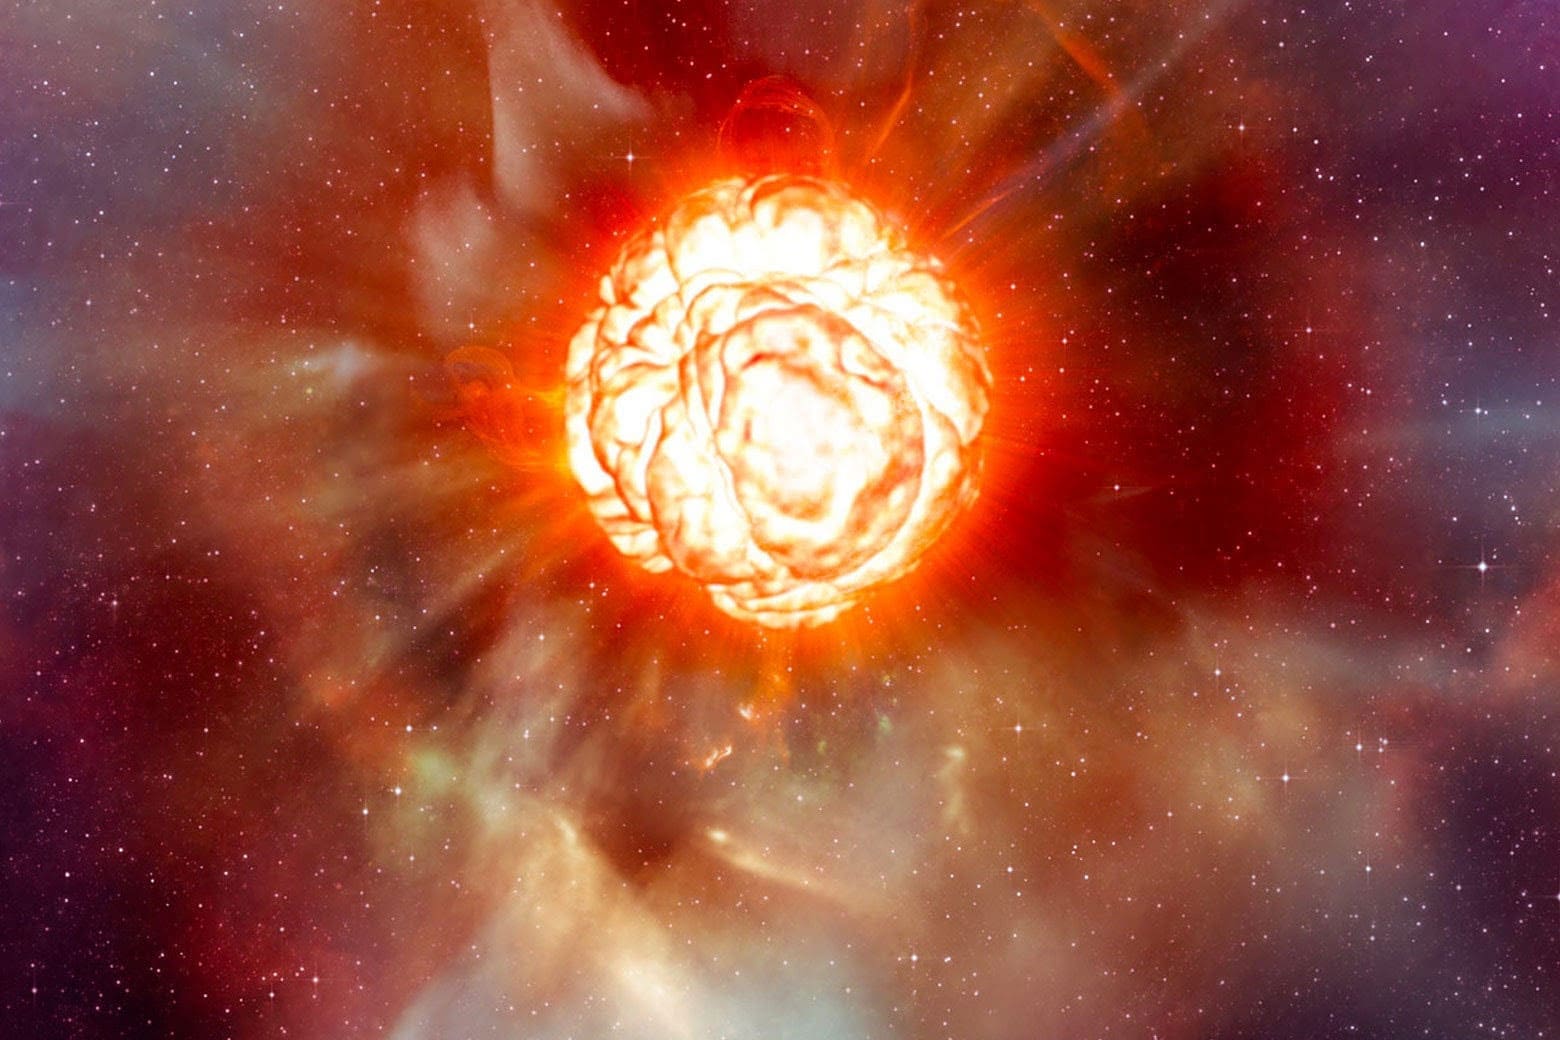 artist’s impression shows the supergiant star Betelgeuse